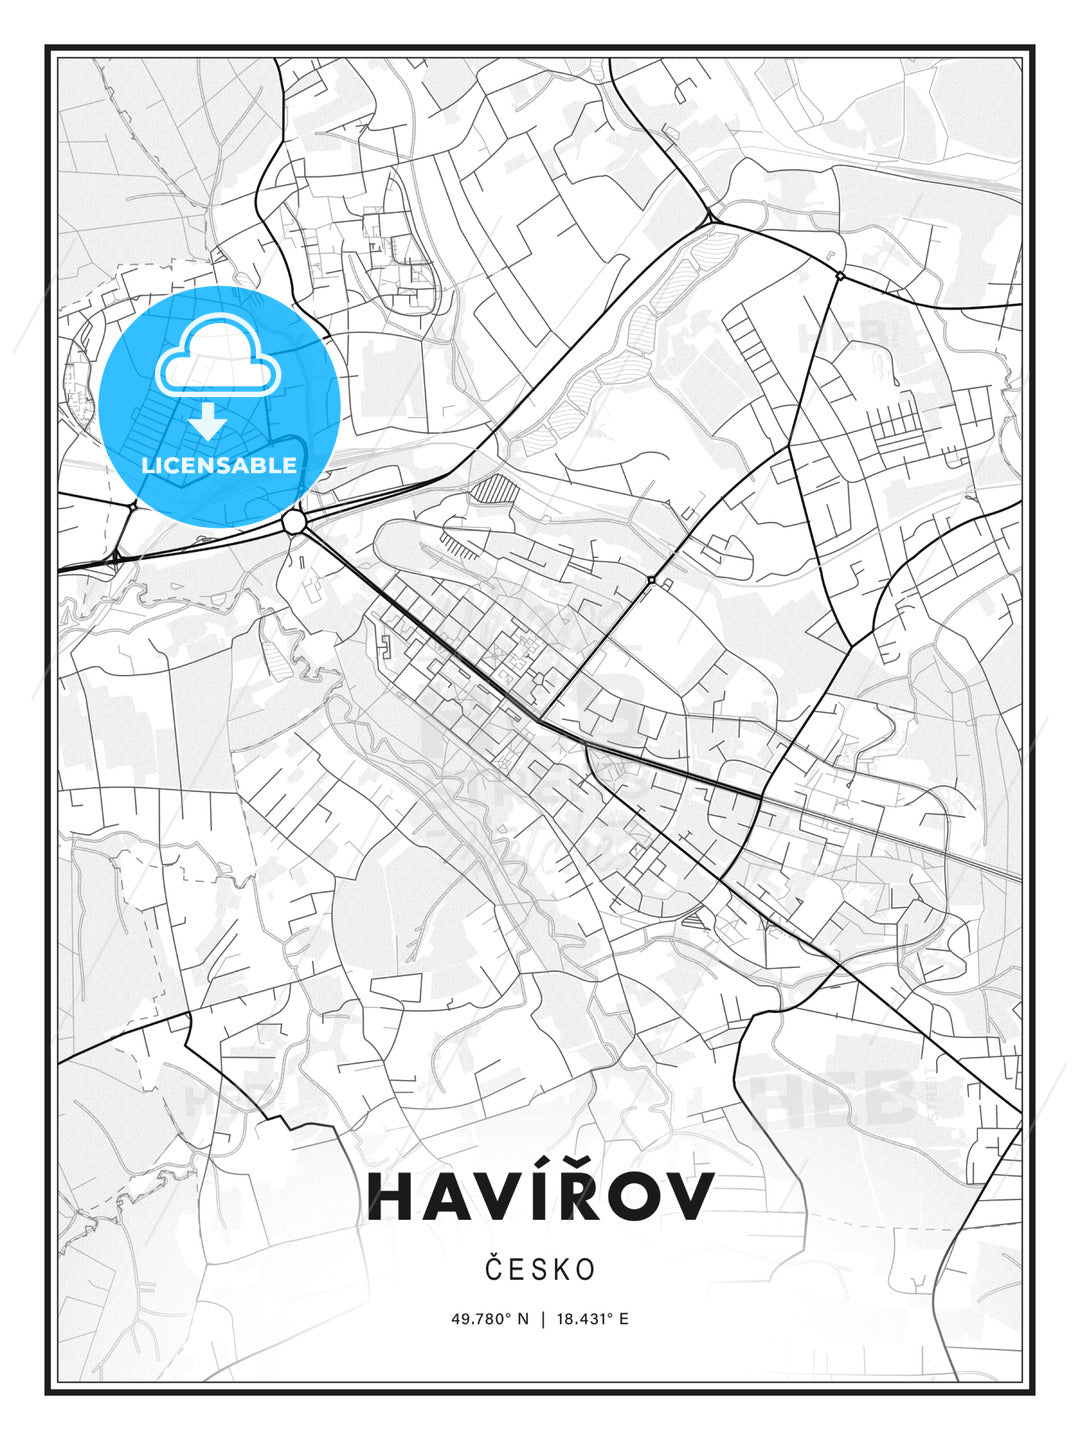 Havířov, Czechia, Modern Print Template in Various Formats - HEBSTREITS Sketches